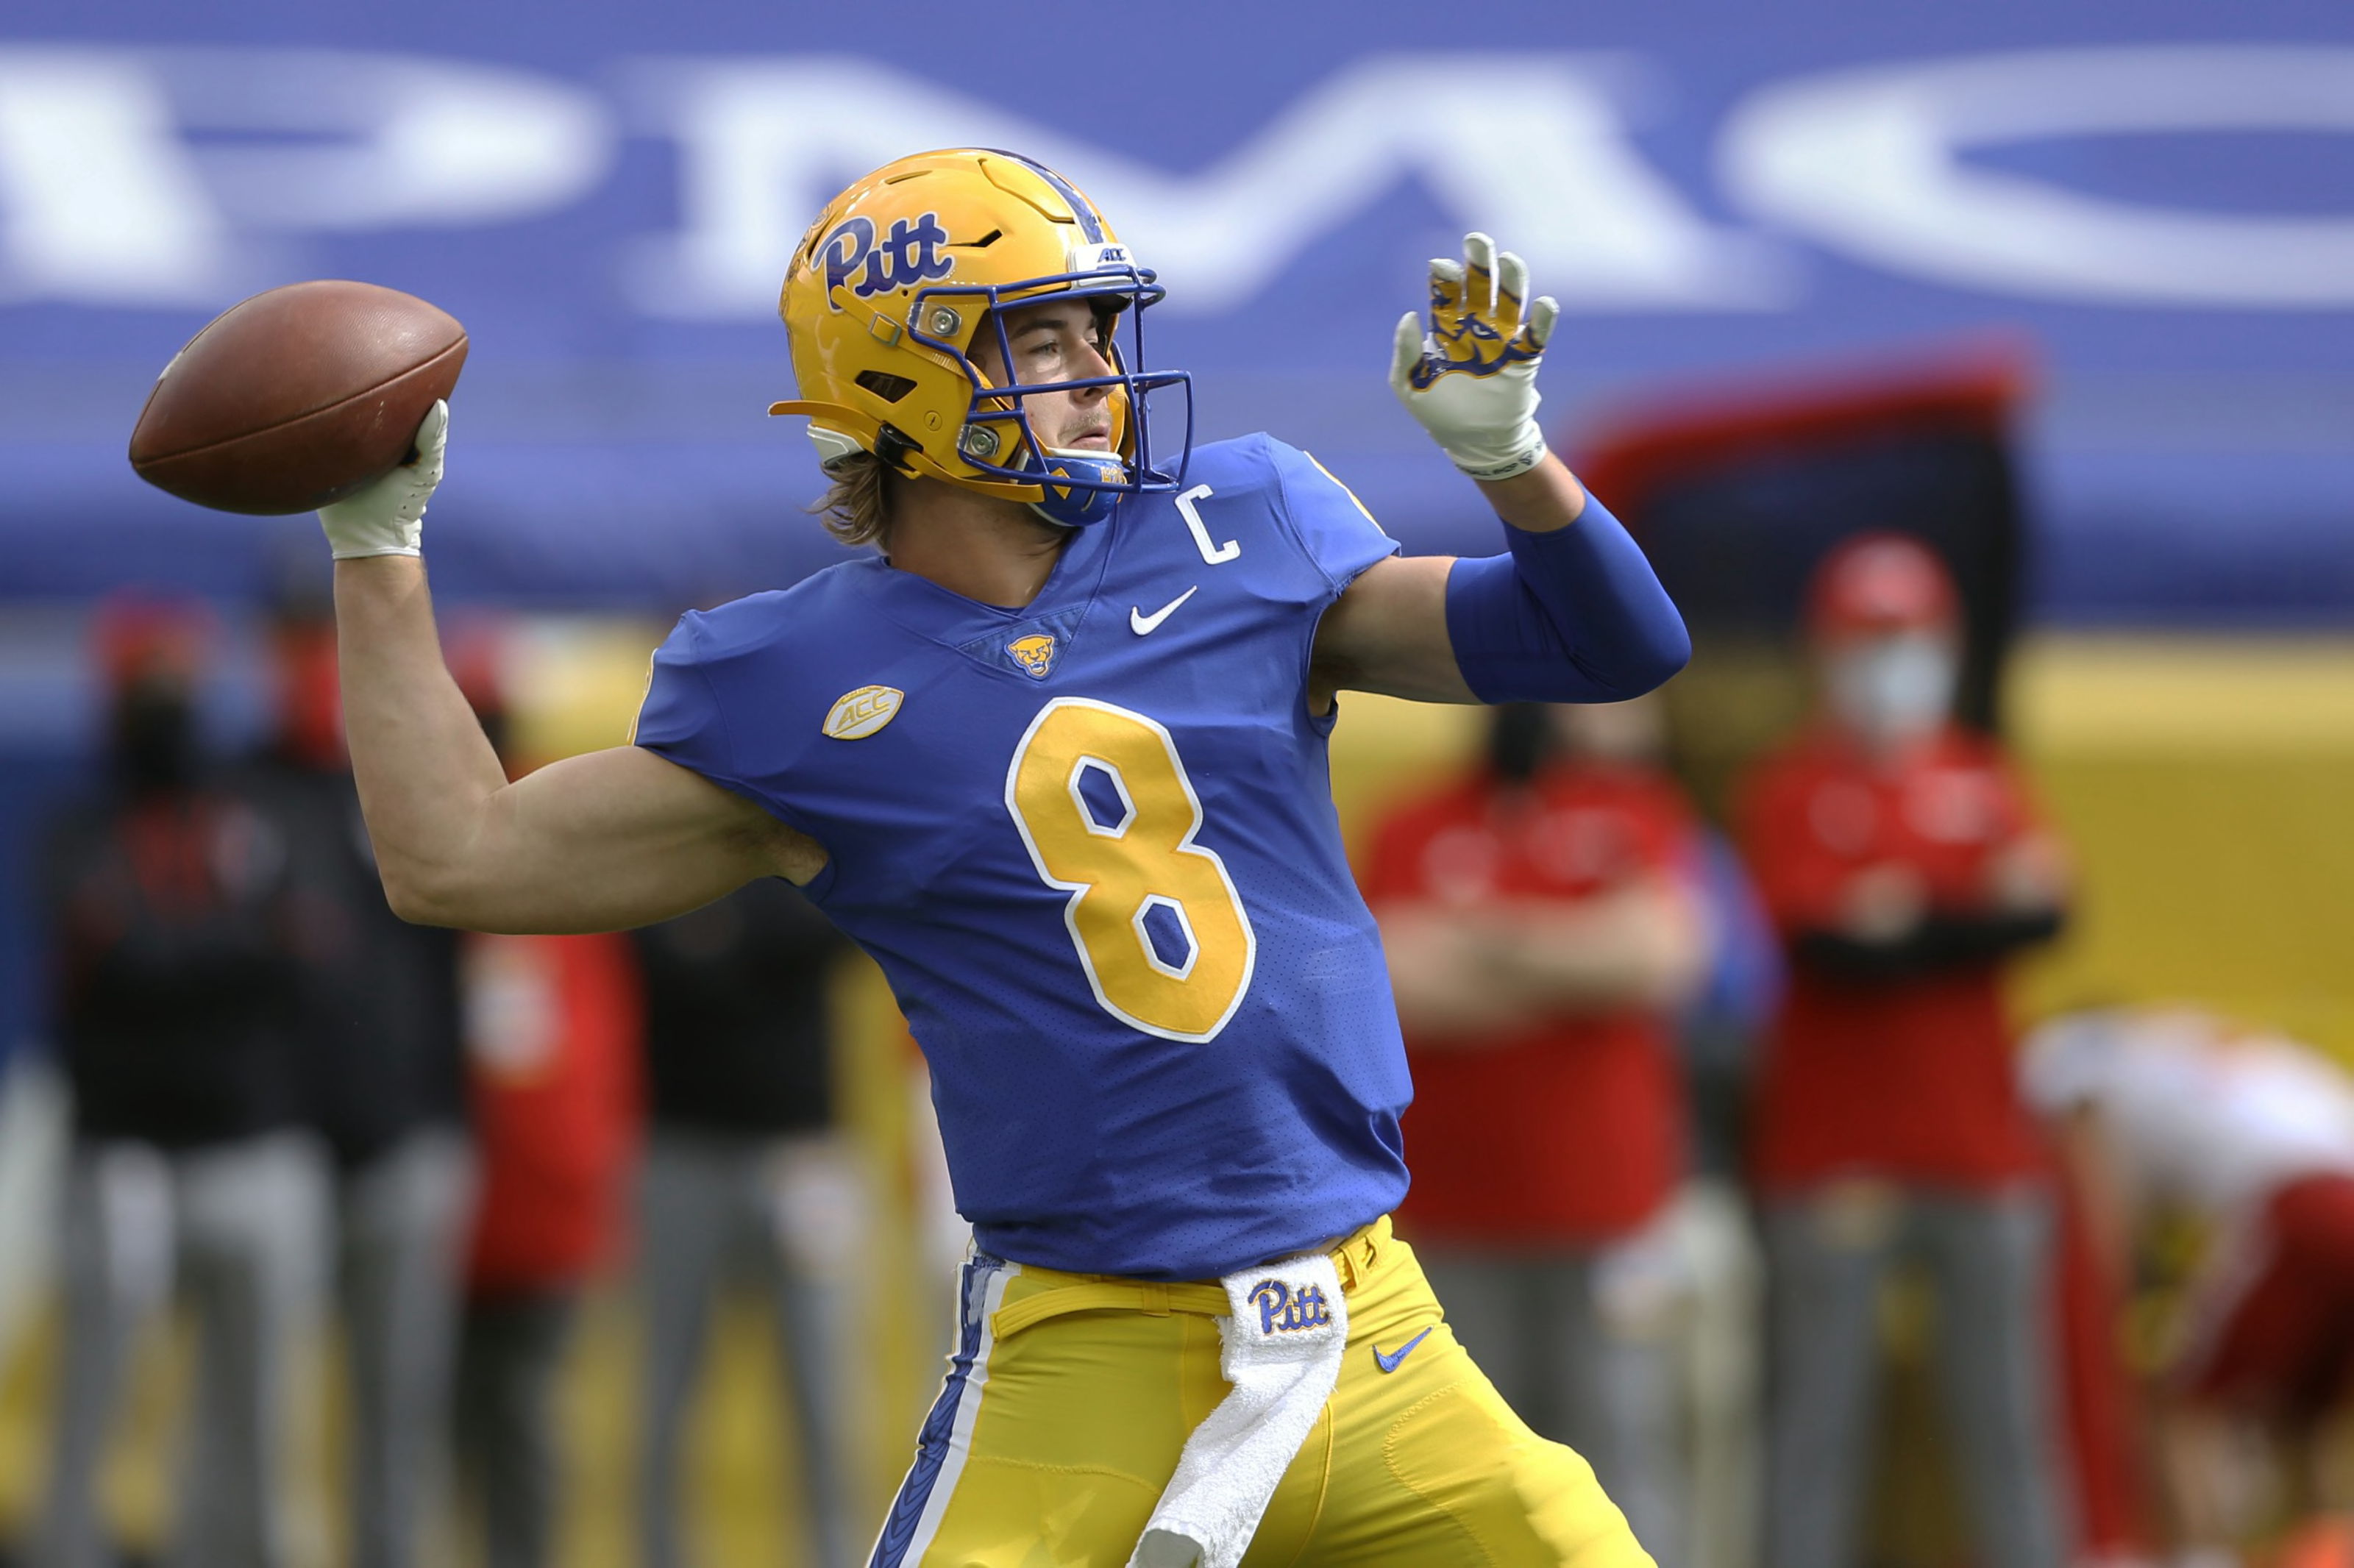 pitt-football-3-takeaways-from-shocking-upset-loss-to-nc-state-page-3